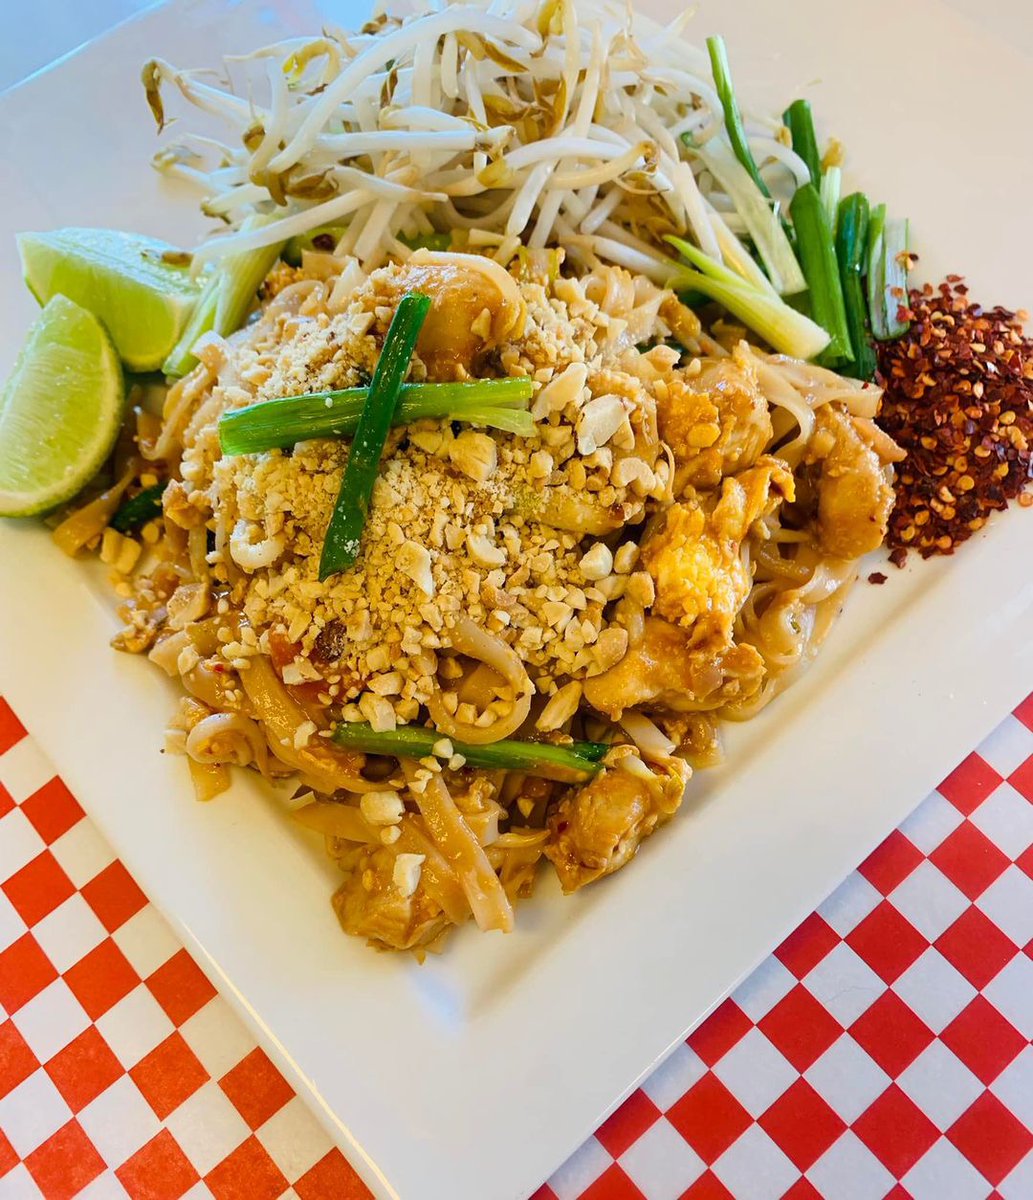 Guess what, you lucky people? Since we are closed on Saturday, we'll have our #delish Pad Thai available a day earlier this week. Come and get it today or tomorrow - whilst stocks last!